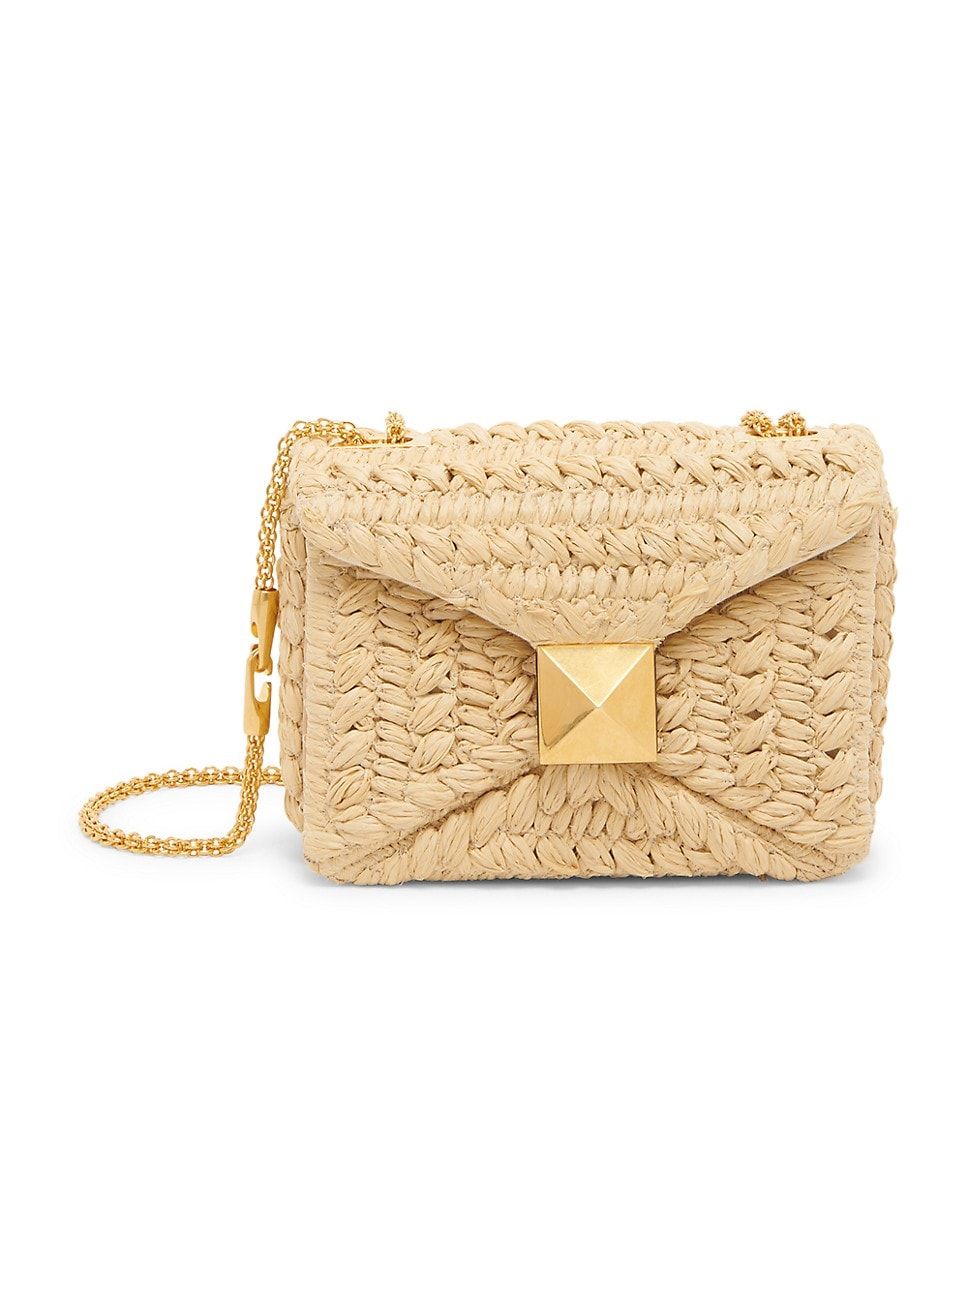 Small One Stud Woven Straw Shoulder Bag | Saks Fifth Avenue